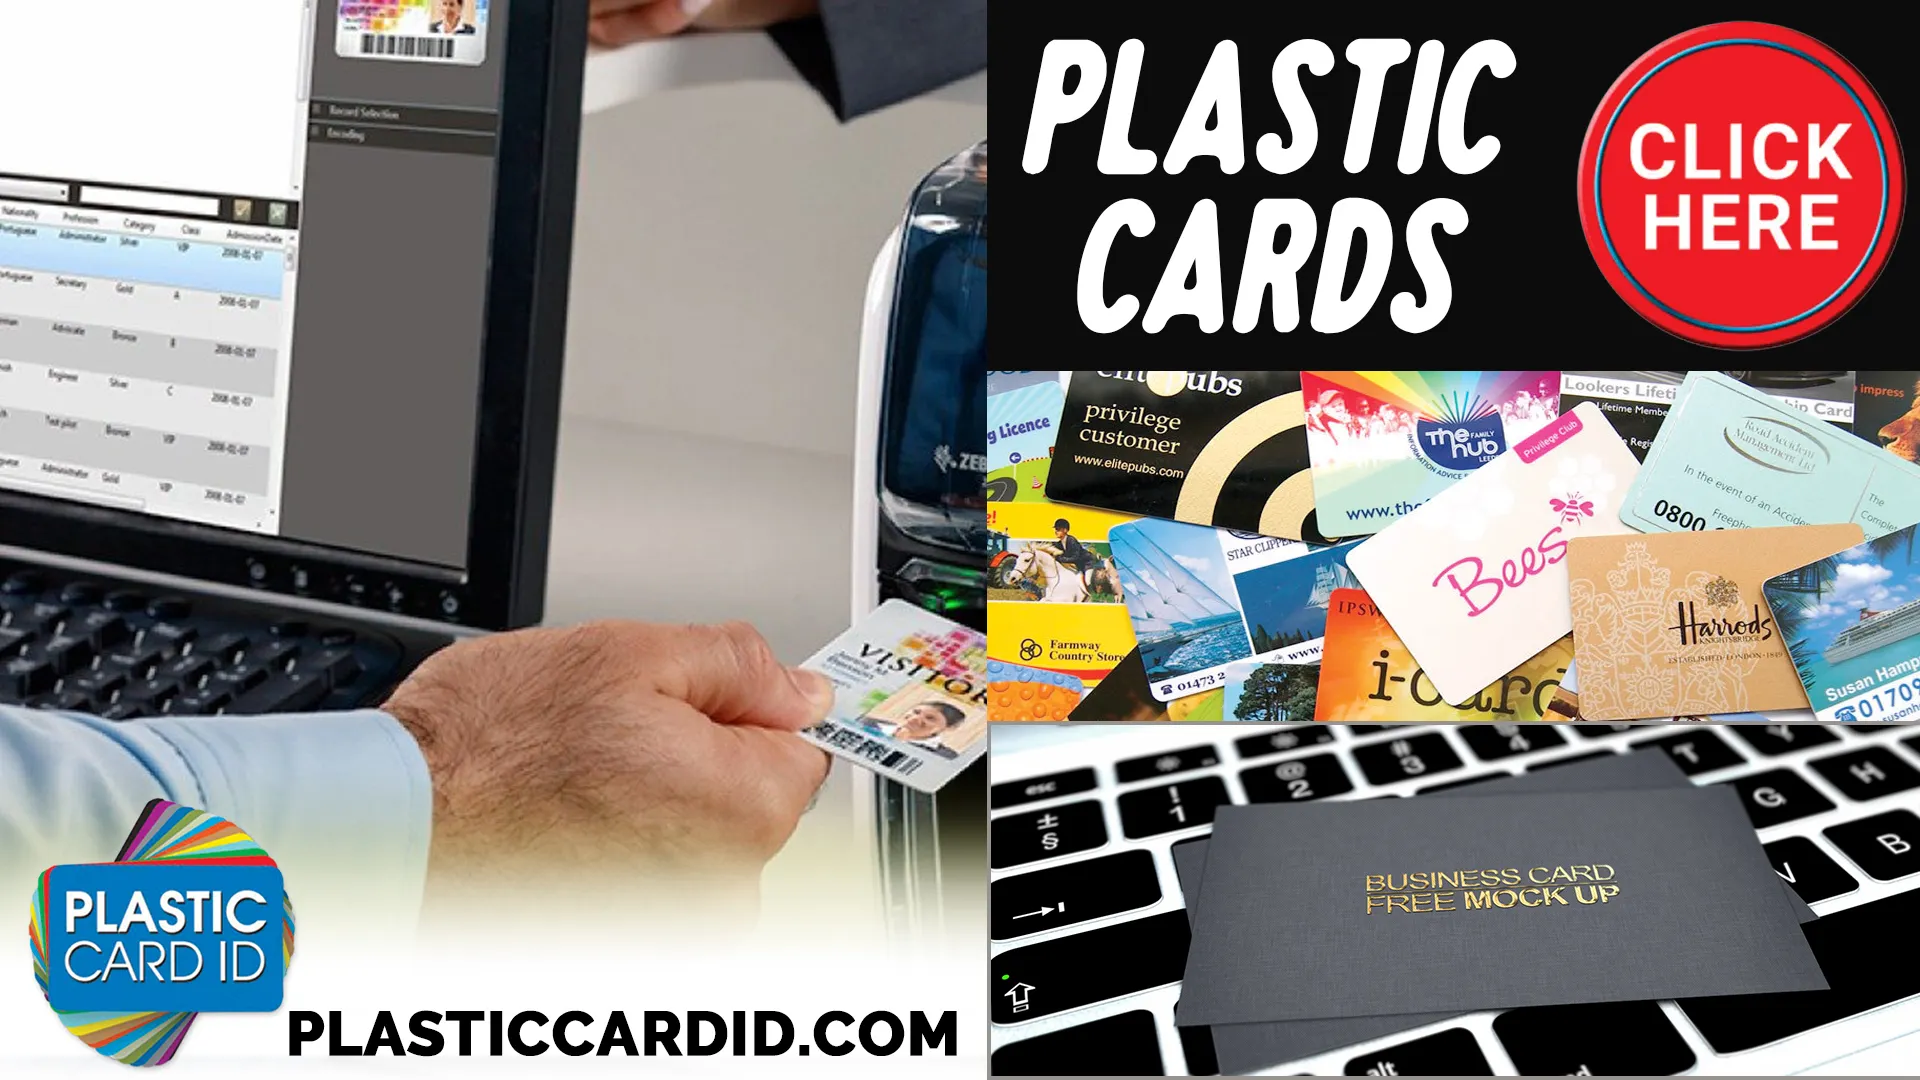 Plastic Card ID
-Crafting Tailor-Made Solutions for Every Client